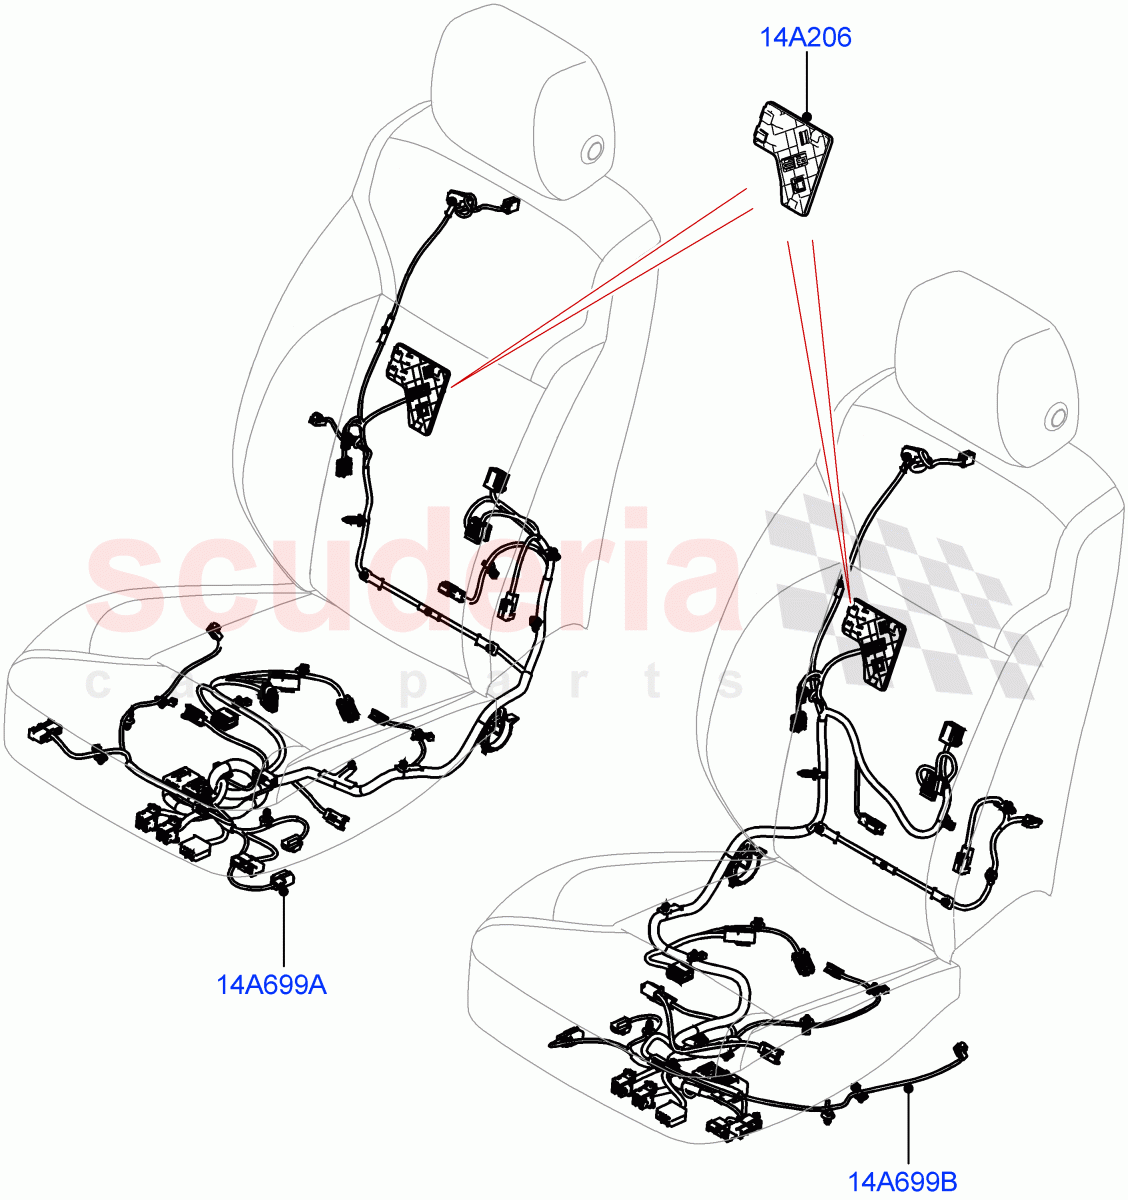 Wiring - Seats(Front Seats)((V)FROMMA000001) of Land Rover Land Rover Range Rover Velar (2017+) [3.0 I6 Turbo Diesel AJ20D6]